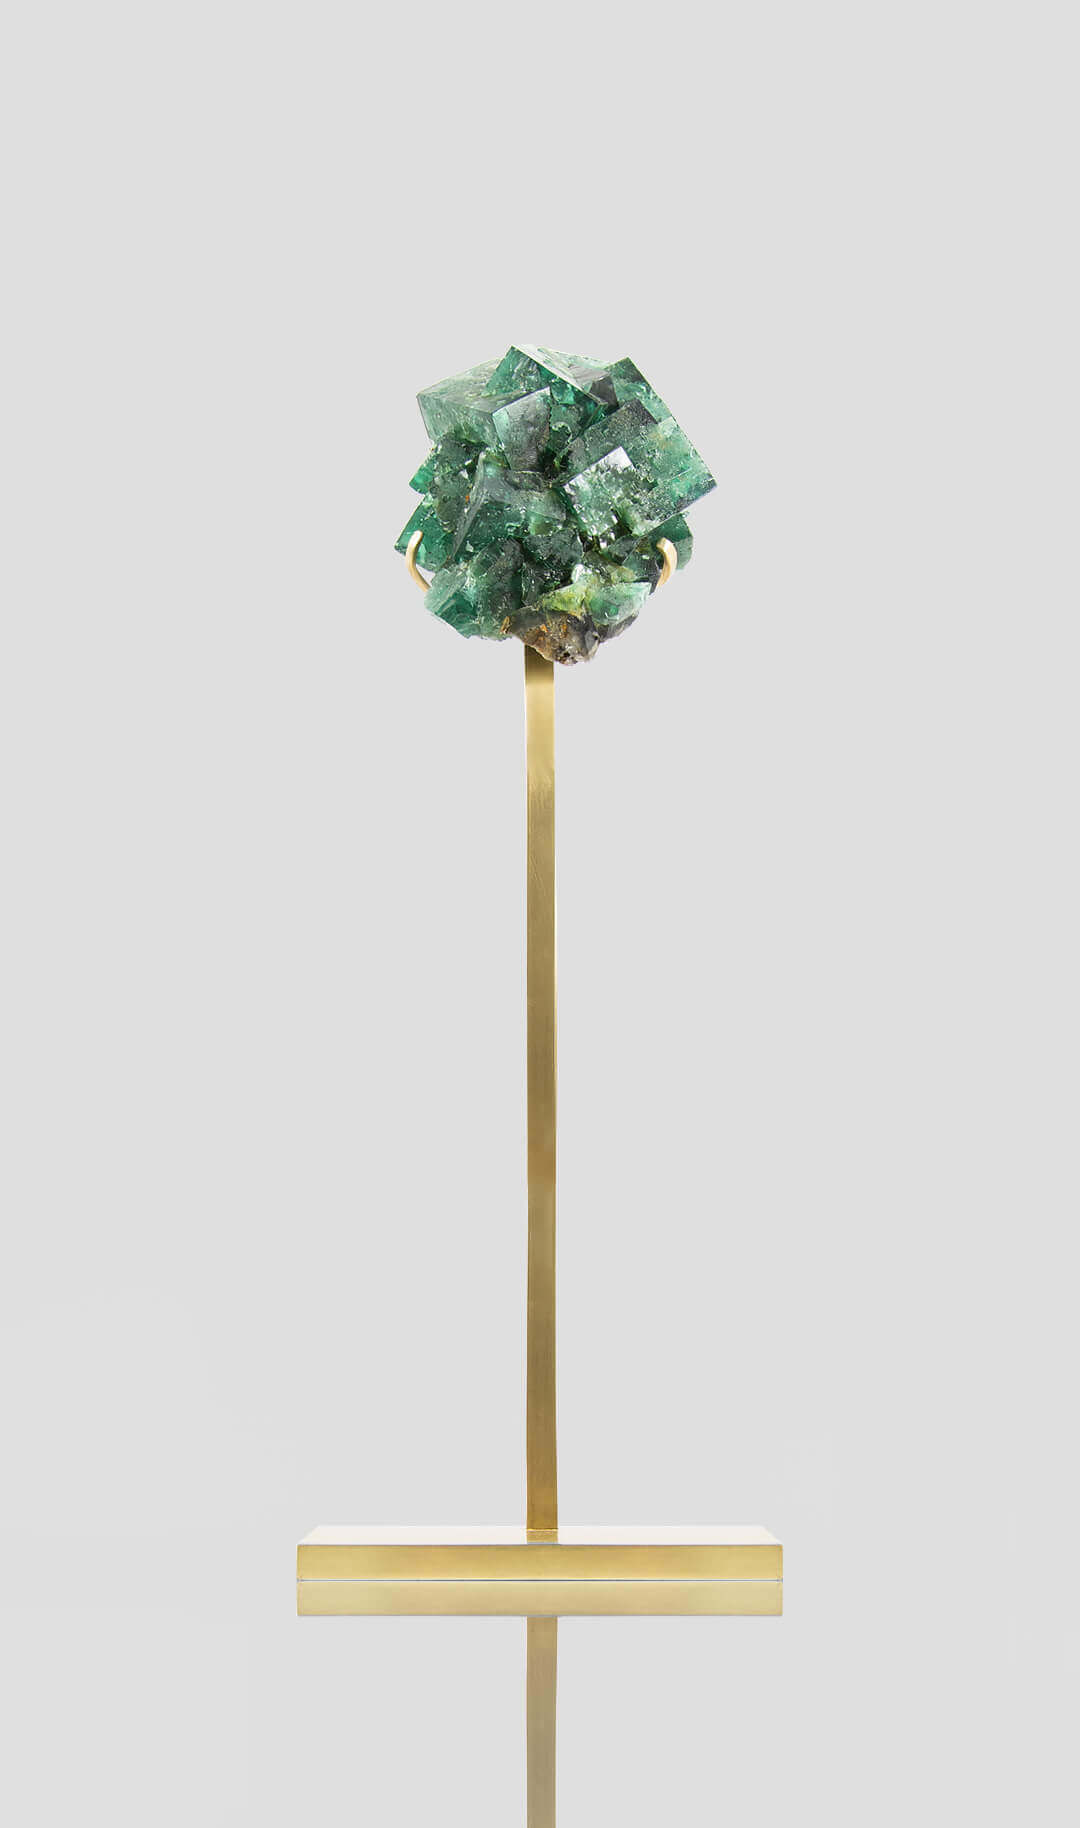 stunning green British fluorite for sale on the fossil store custom brass stand 41